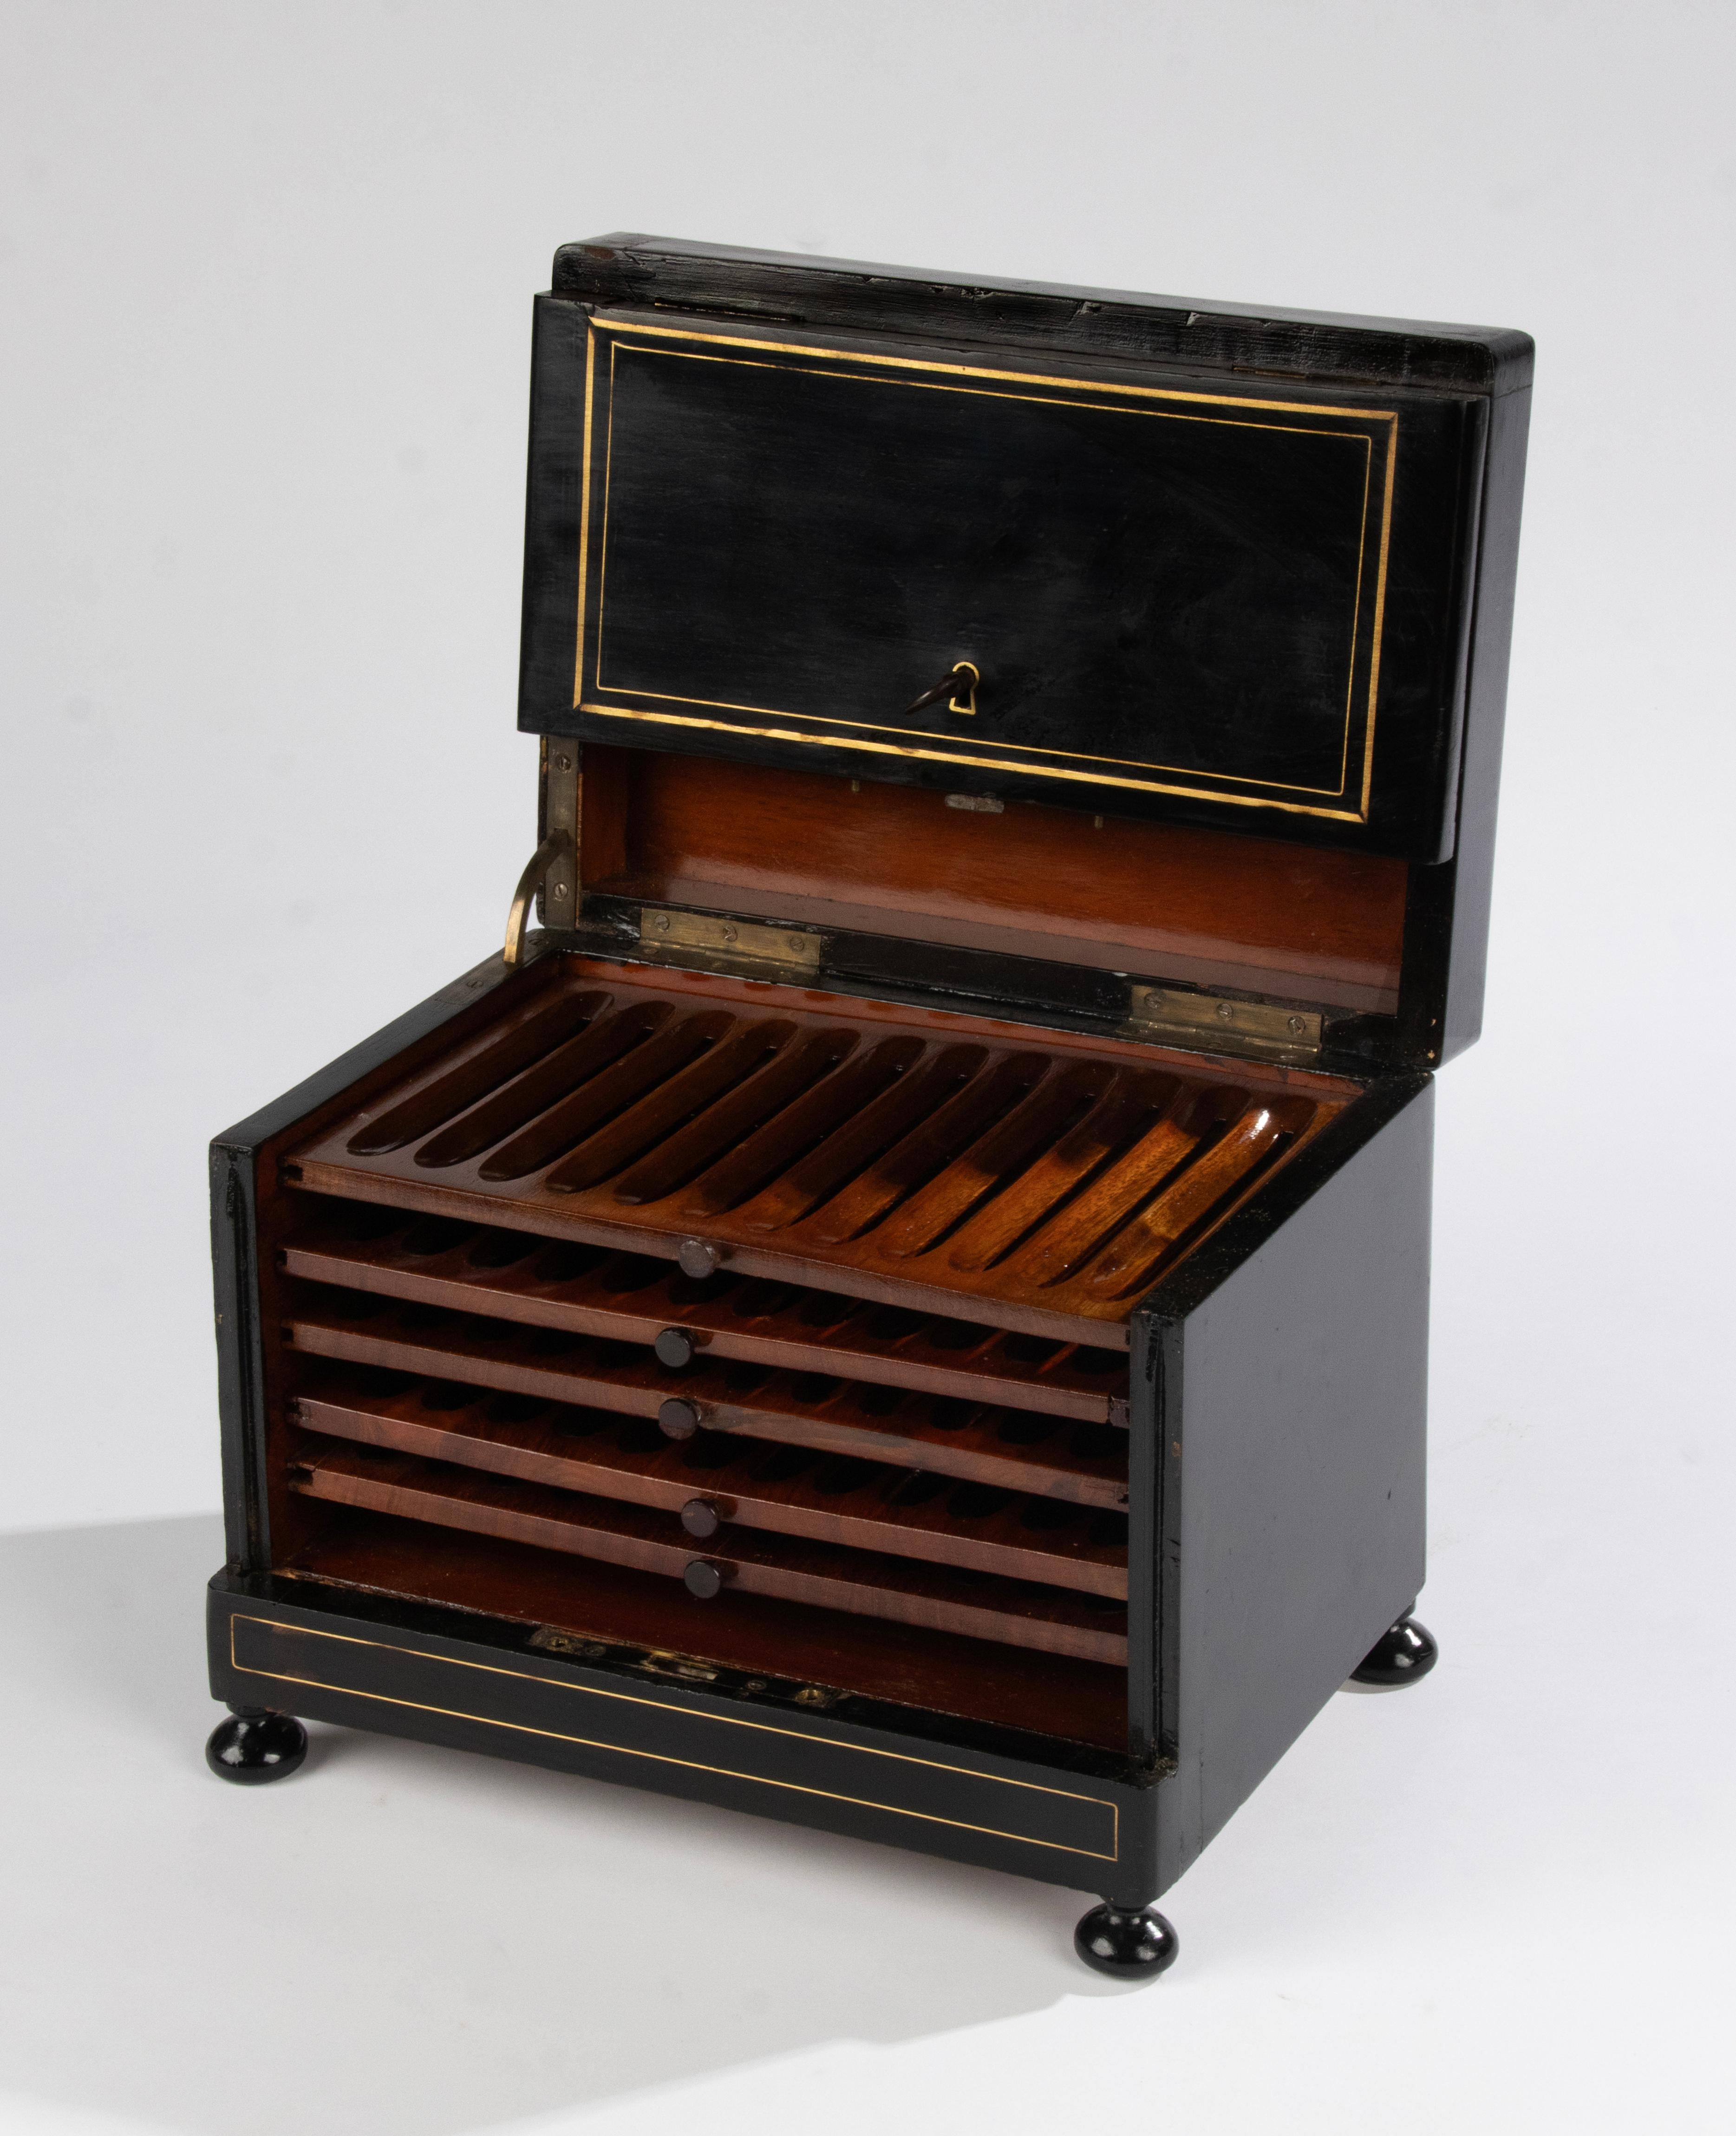 A stylish Napoleon III cigar cabinet, crafted with ebonized wood, brass inlays, and a distinctive medallion at the top, this late 1800s piece reflects the refined style of the Napoleon III era. Inside, organized compartments with five drawers, space